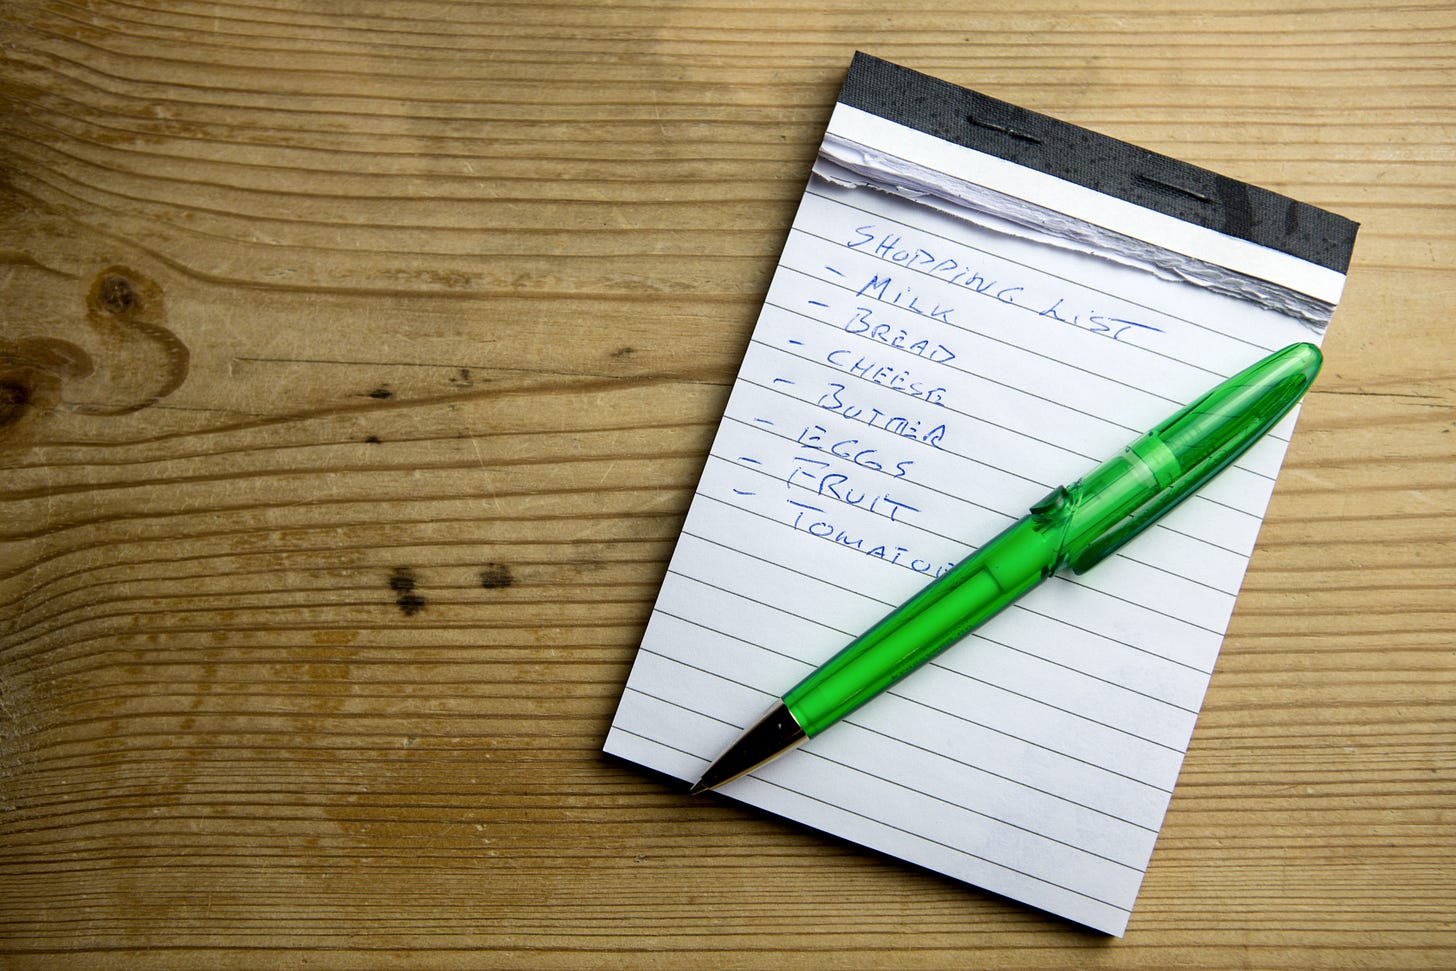 A white notepad with black lines sits on a brown wooden table. A green pen rests on top of the notepad.